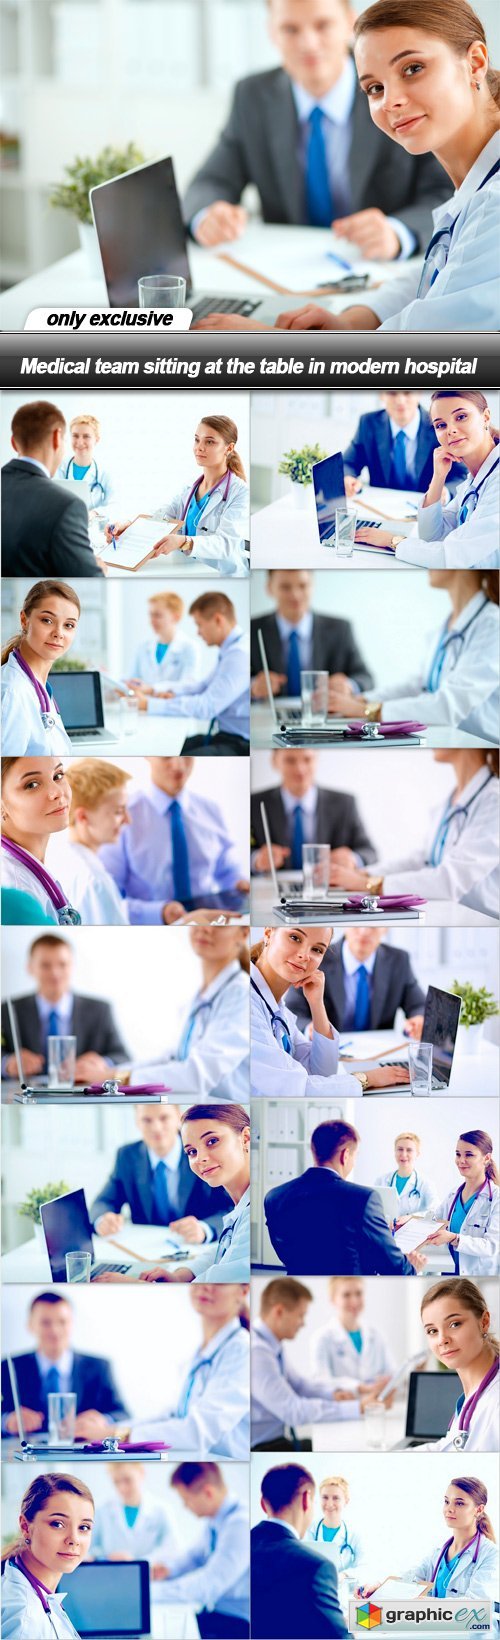 Medical team sitting at the table in modern hospital - 15 UHQ JPEG